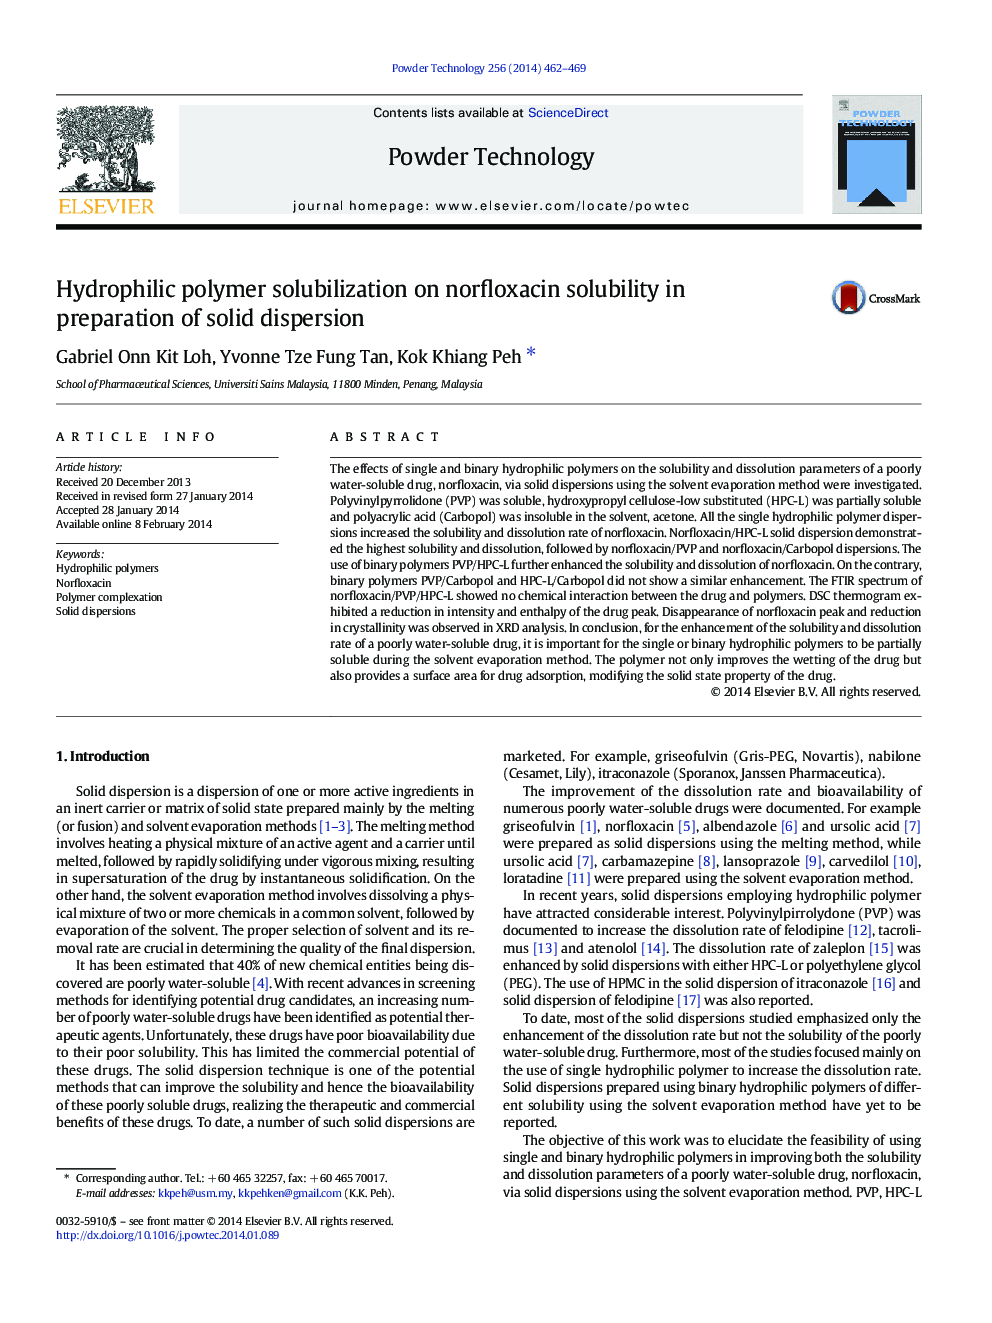 Hydrophilic polymer solubilization on norfloxacin solubility in preparation of solid dispersion